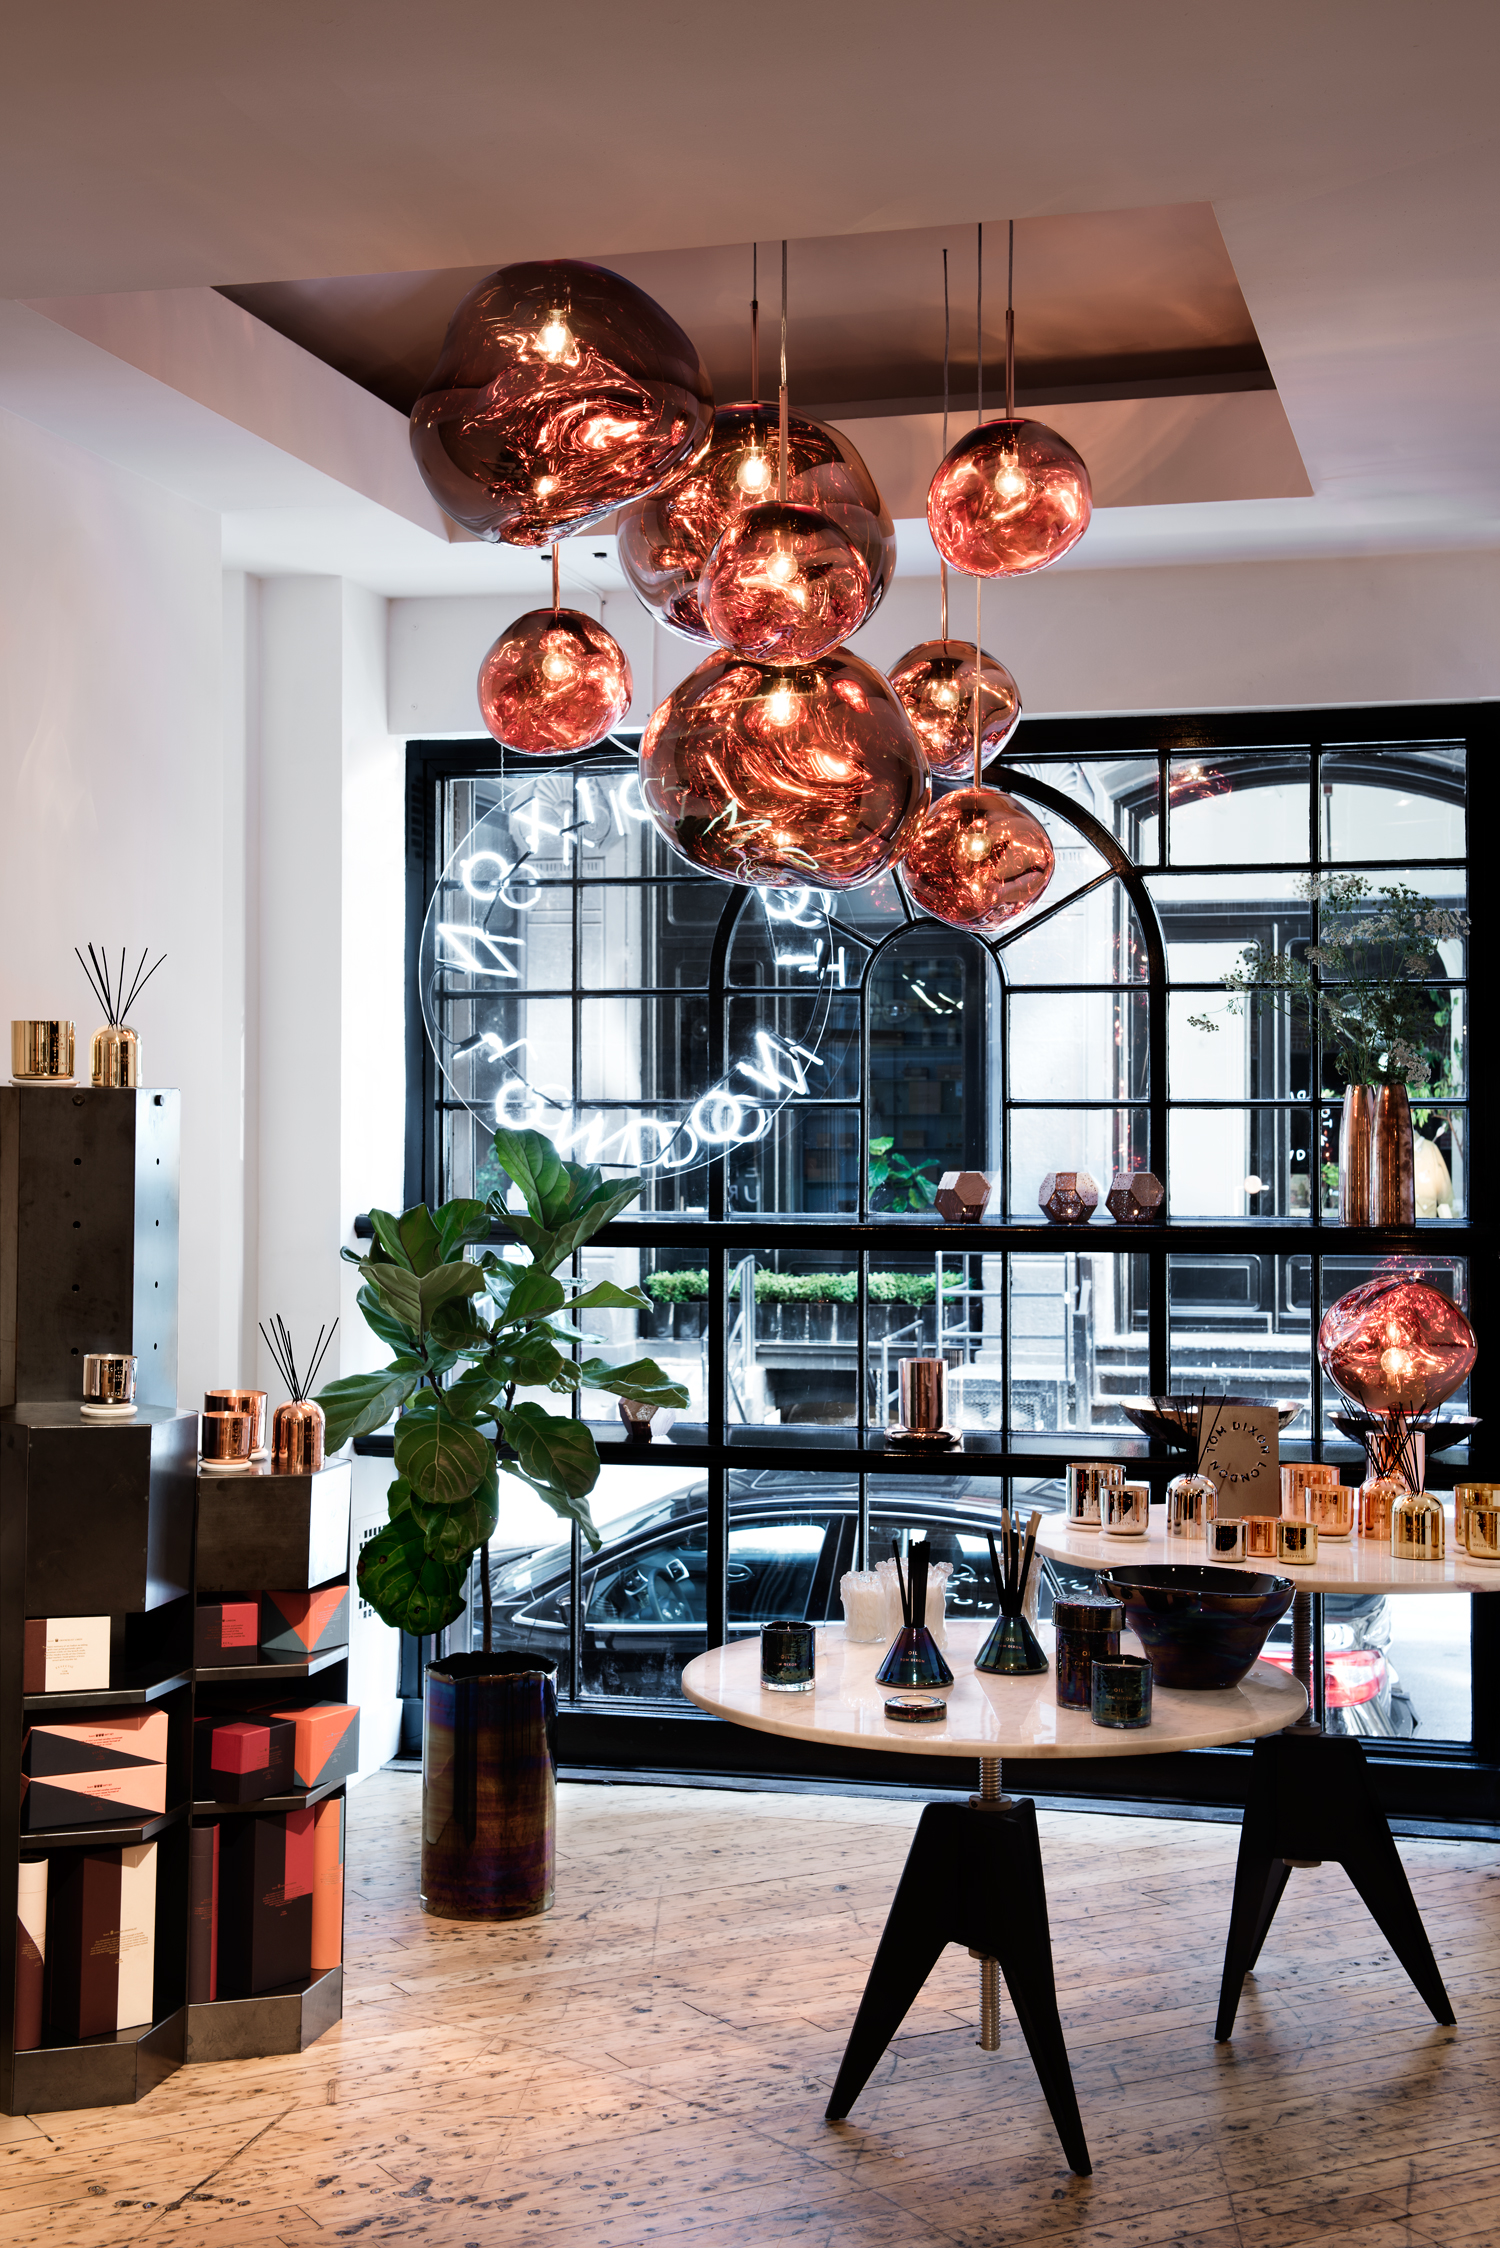 The ground floor of Tom Dixon's New York showroom with mirrored copper pendants and lighting objects. Katie Gibbs, Courtesy of Tom Dixon.